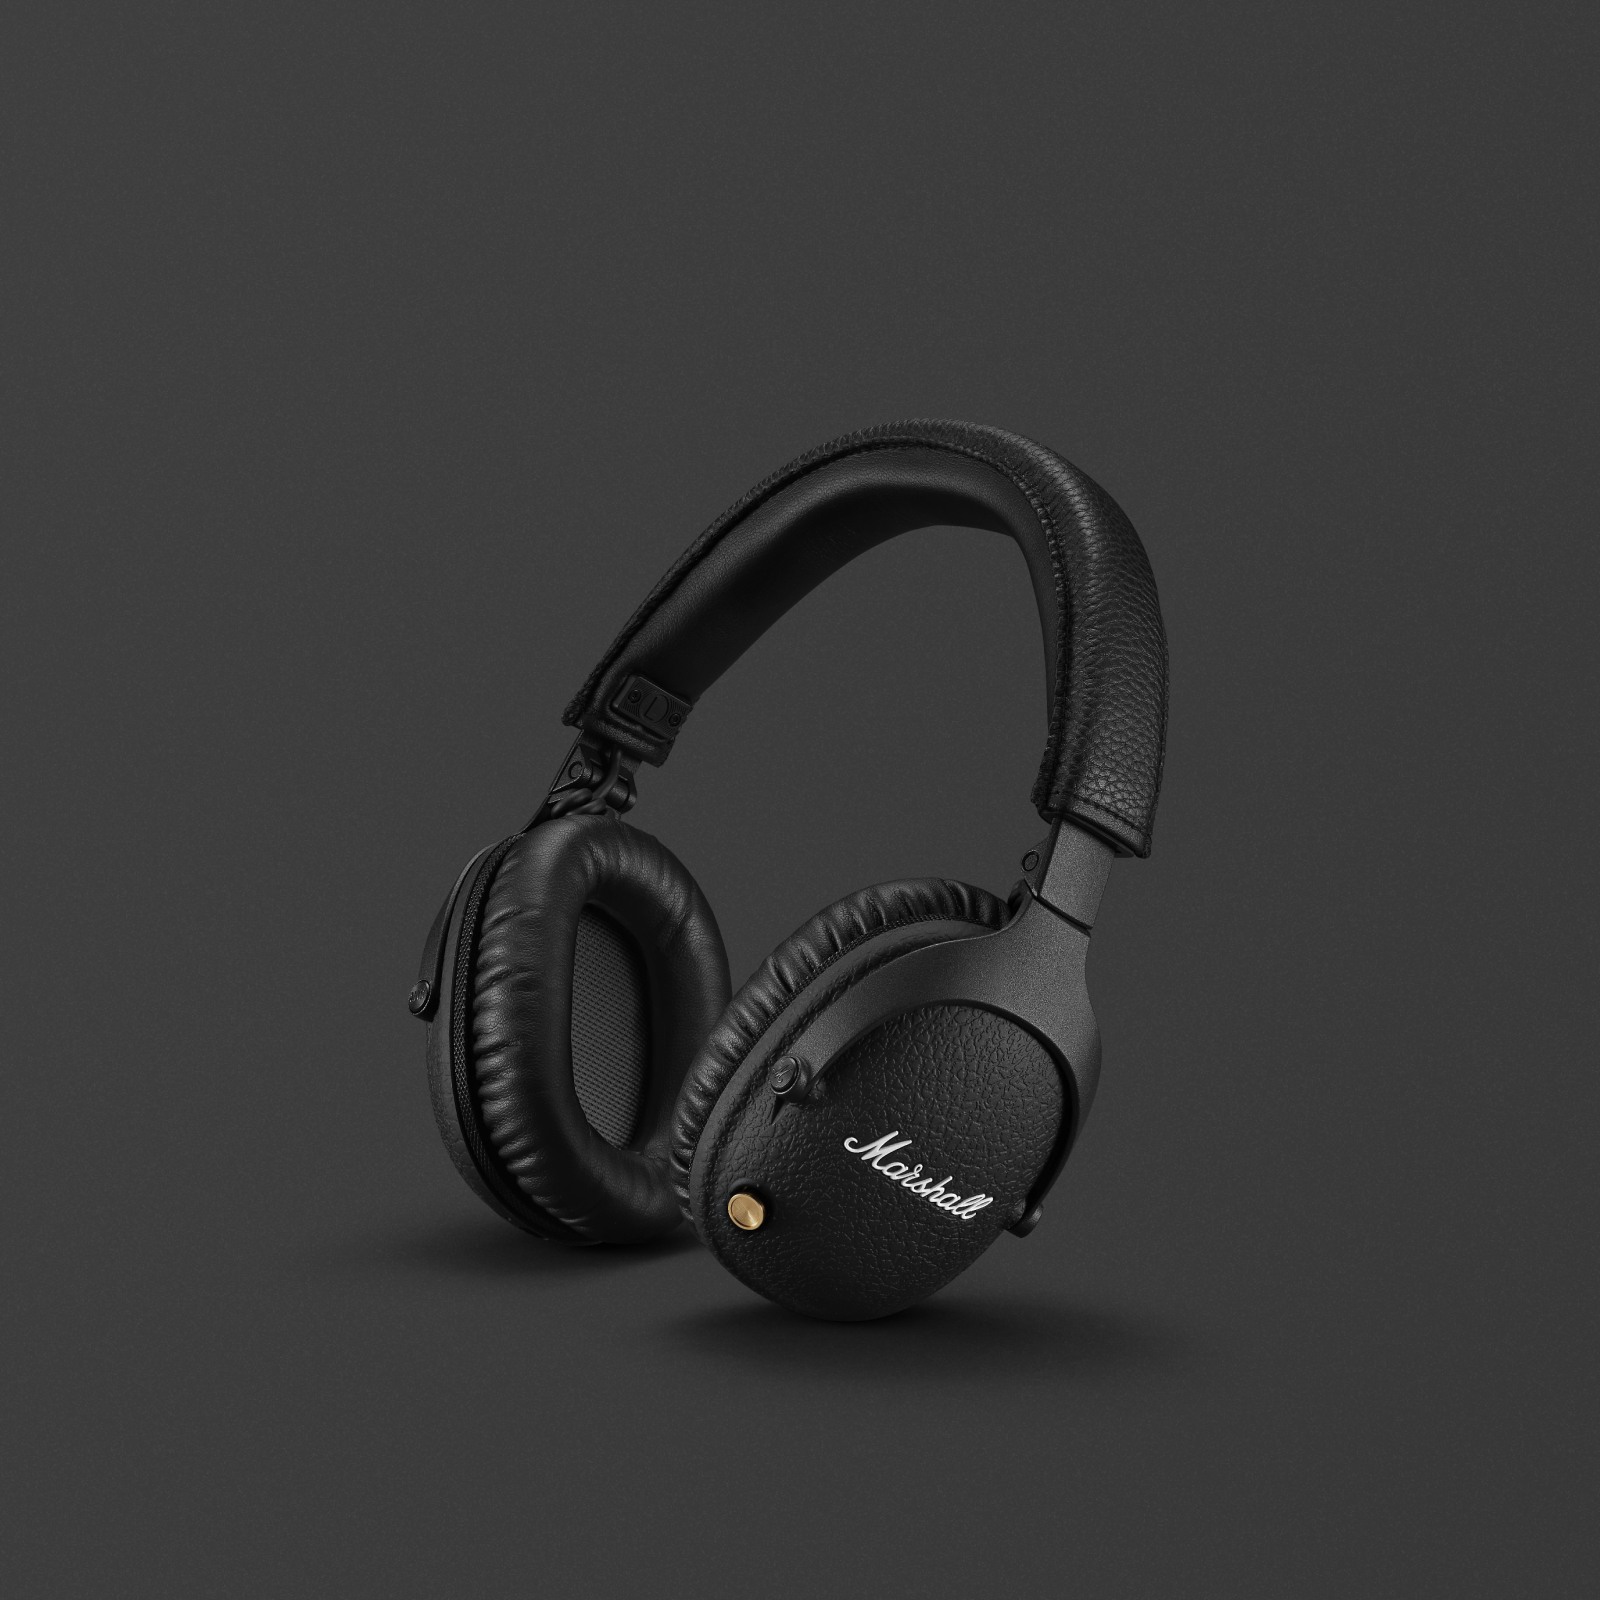 Monitor II A.N.C. wireless headphones with noise cancellation | Marshall.com